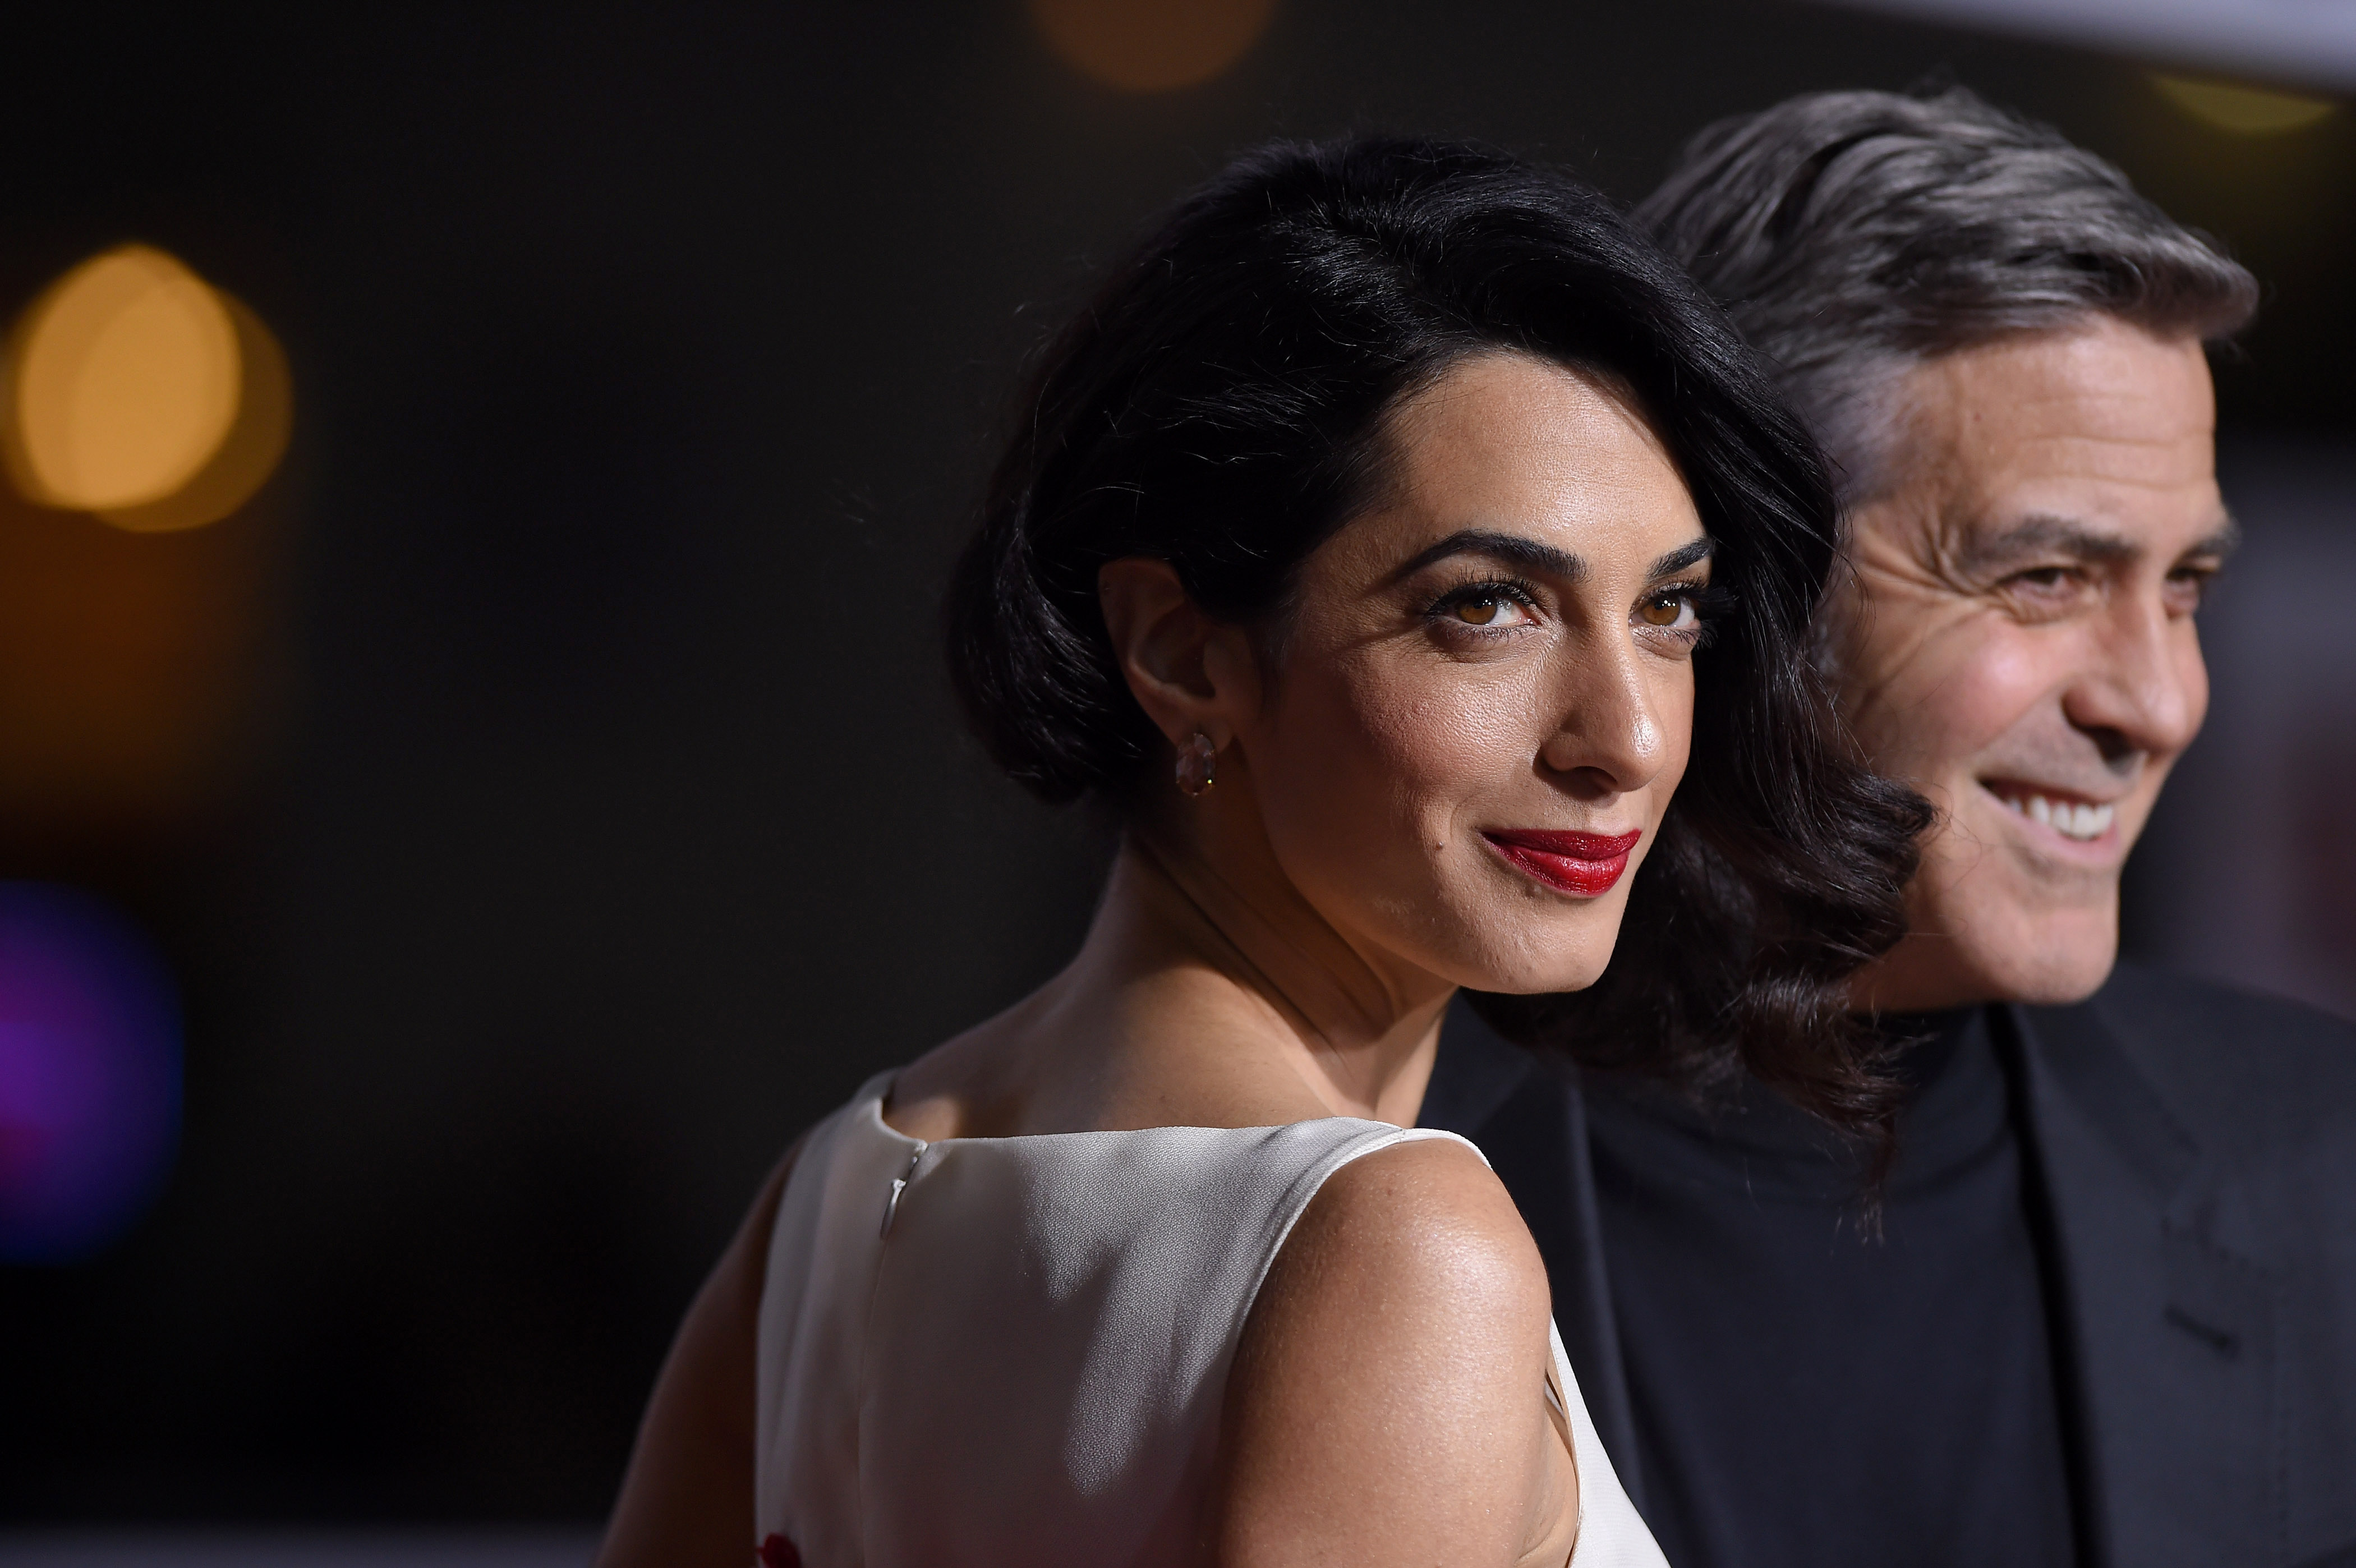 Lawyer Amal Clooney and actor George Clooney arrive at the premiere of <i>Hail, Caesar!</i> at Regency Village Theatre on Feb. 1, 2016, in Westwood, Calif. (Axelle/Bauer-Griffin—FilmMagic)